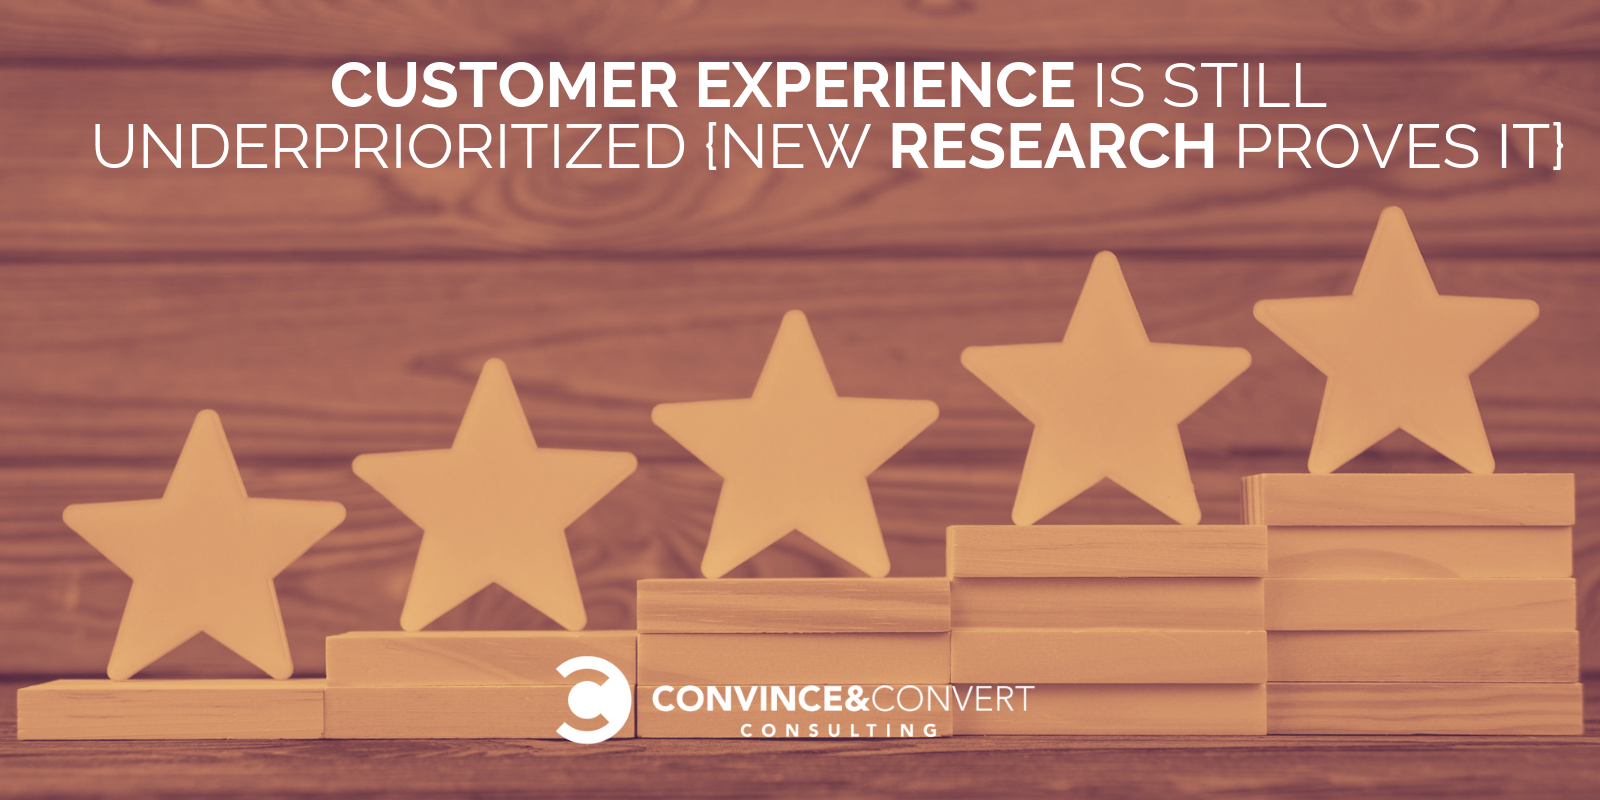 Customer Experience Research